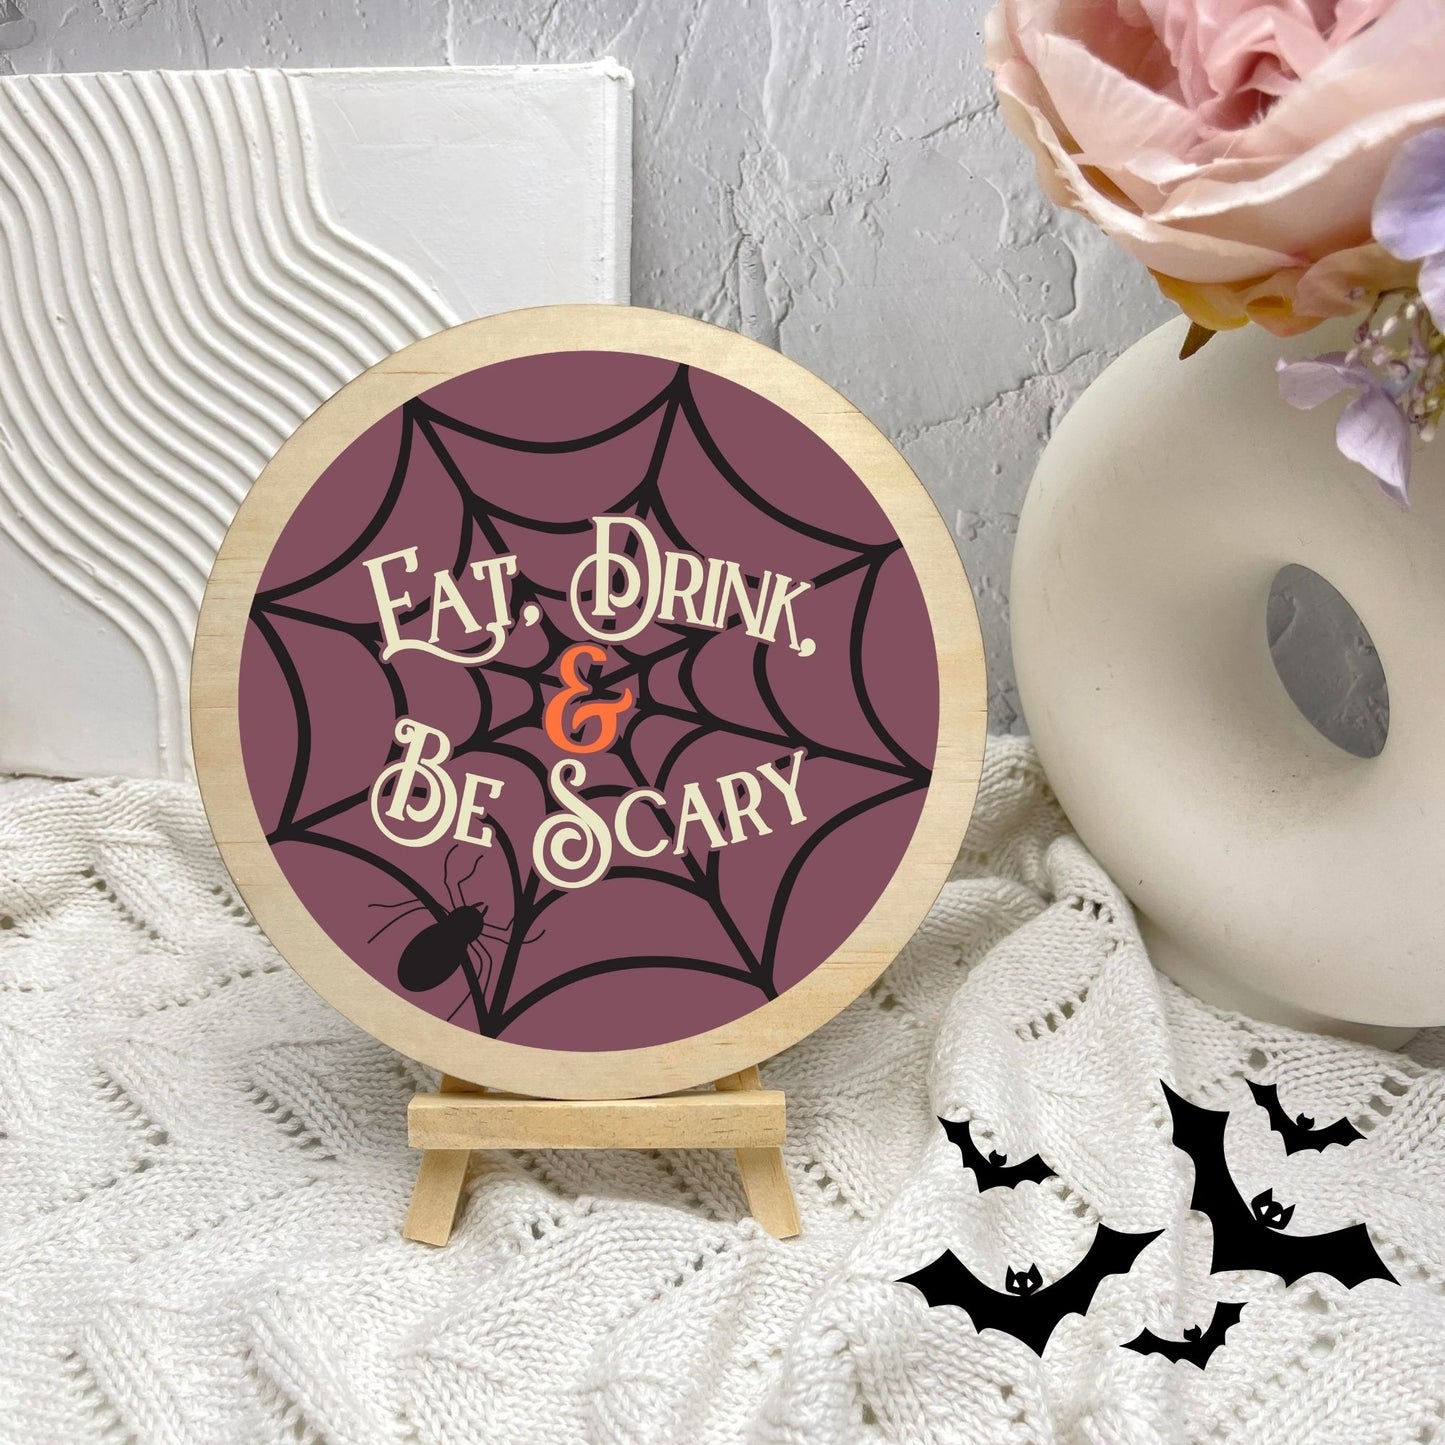 Eat drink and be scary sign, Halloween Decor, Spooky Vibes, hocus pocus sign, trick or treat decor, haunted house h39